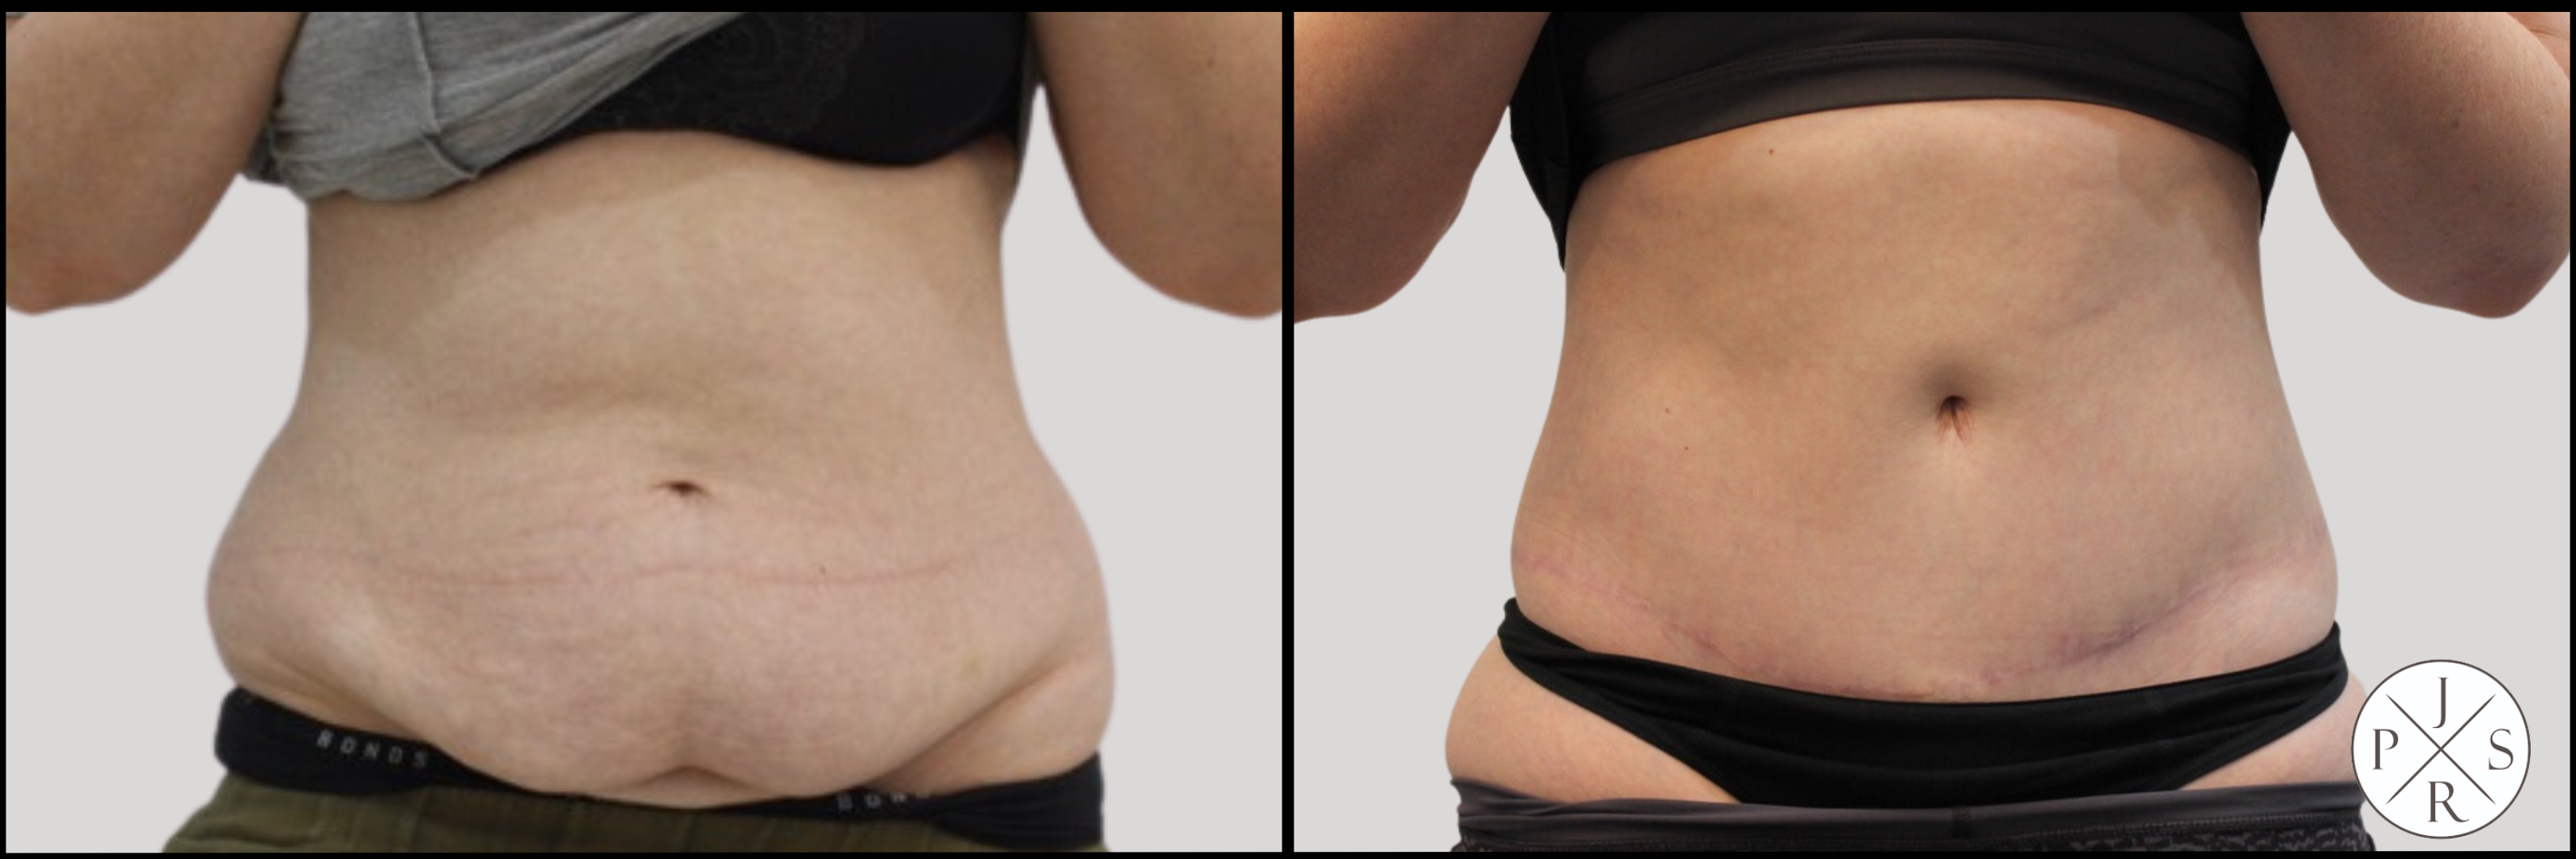 Skin defect closure with reverse abdominoplasty flap.